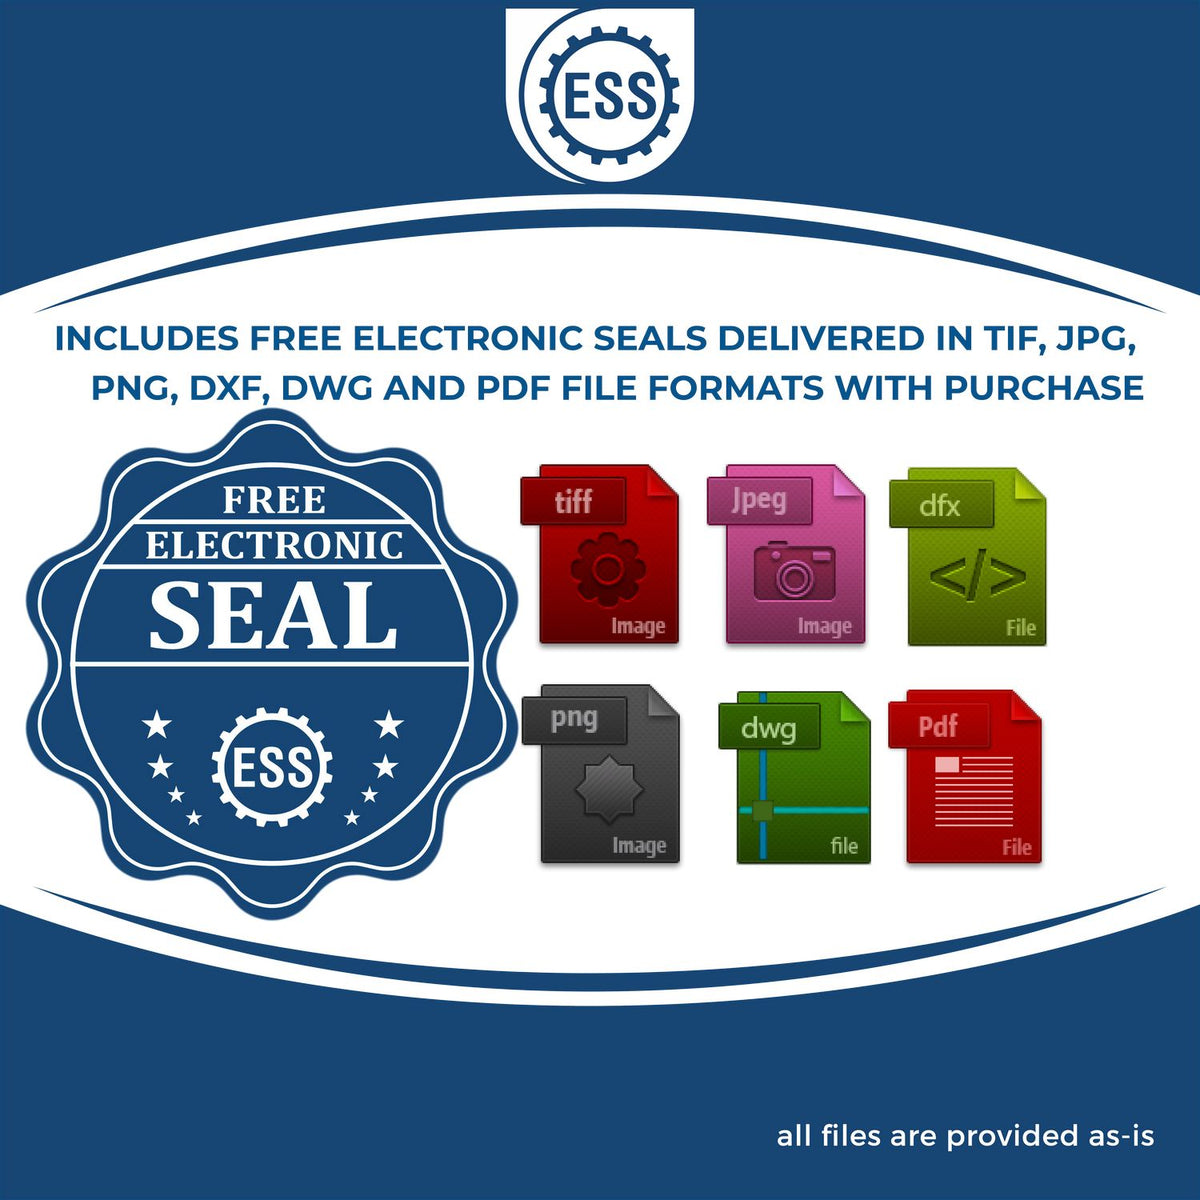 An infographic for the free electronic seal for the Extended Long Reach Iowa Surveyor Embosser illustrating the different file type icons such as DXF, DWG, TIF, JPG and PNG.